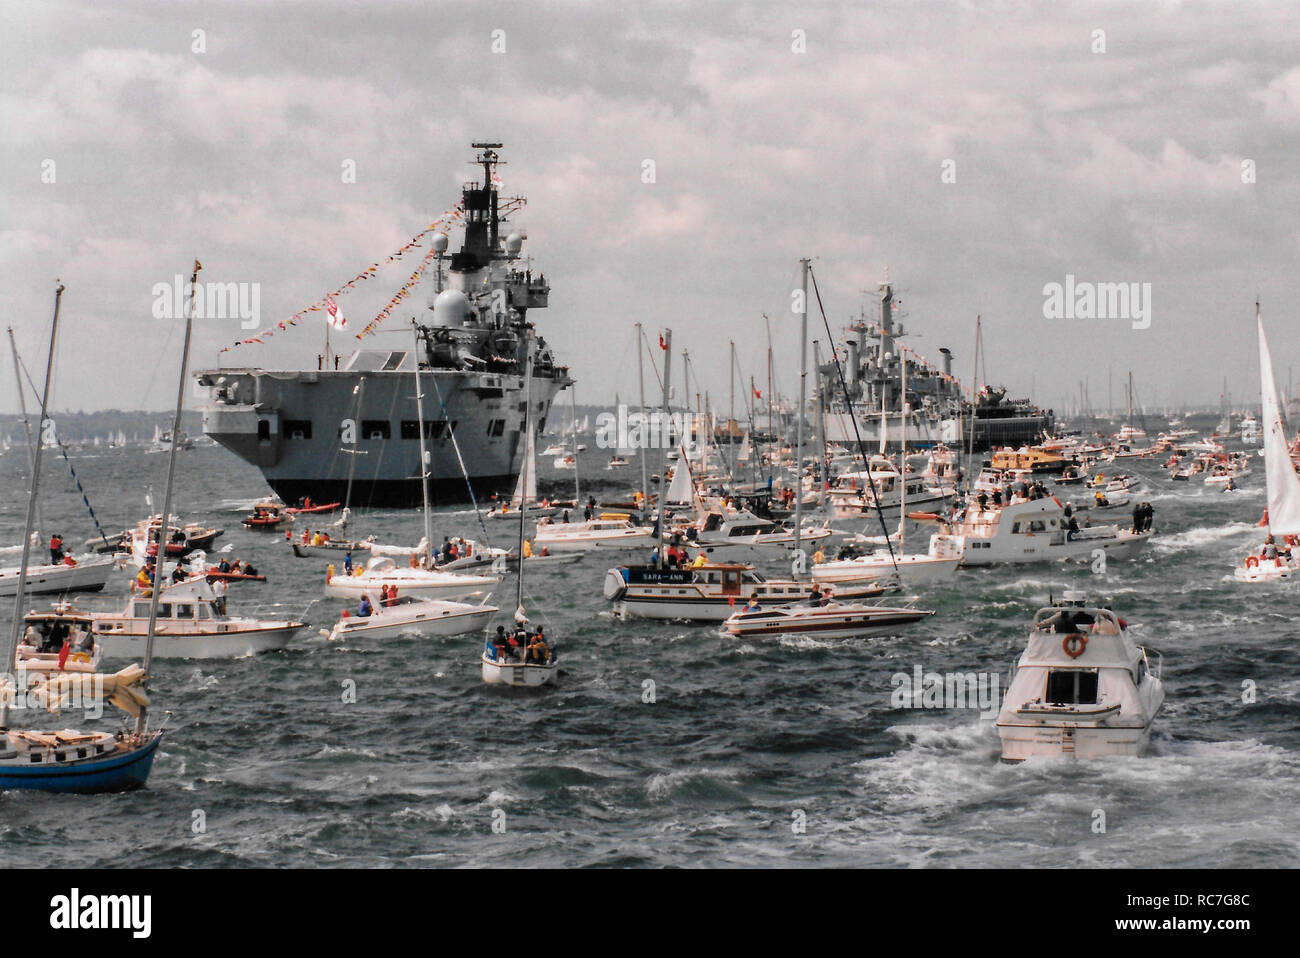 USS Aircraft Carrier George Washington attends the 50th Anniversary D-Day landings Fleet Review on 6th June 1994 at Spithead off Portsmouth UK. Stock Photo